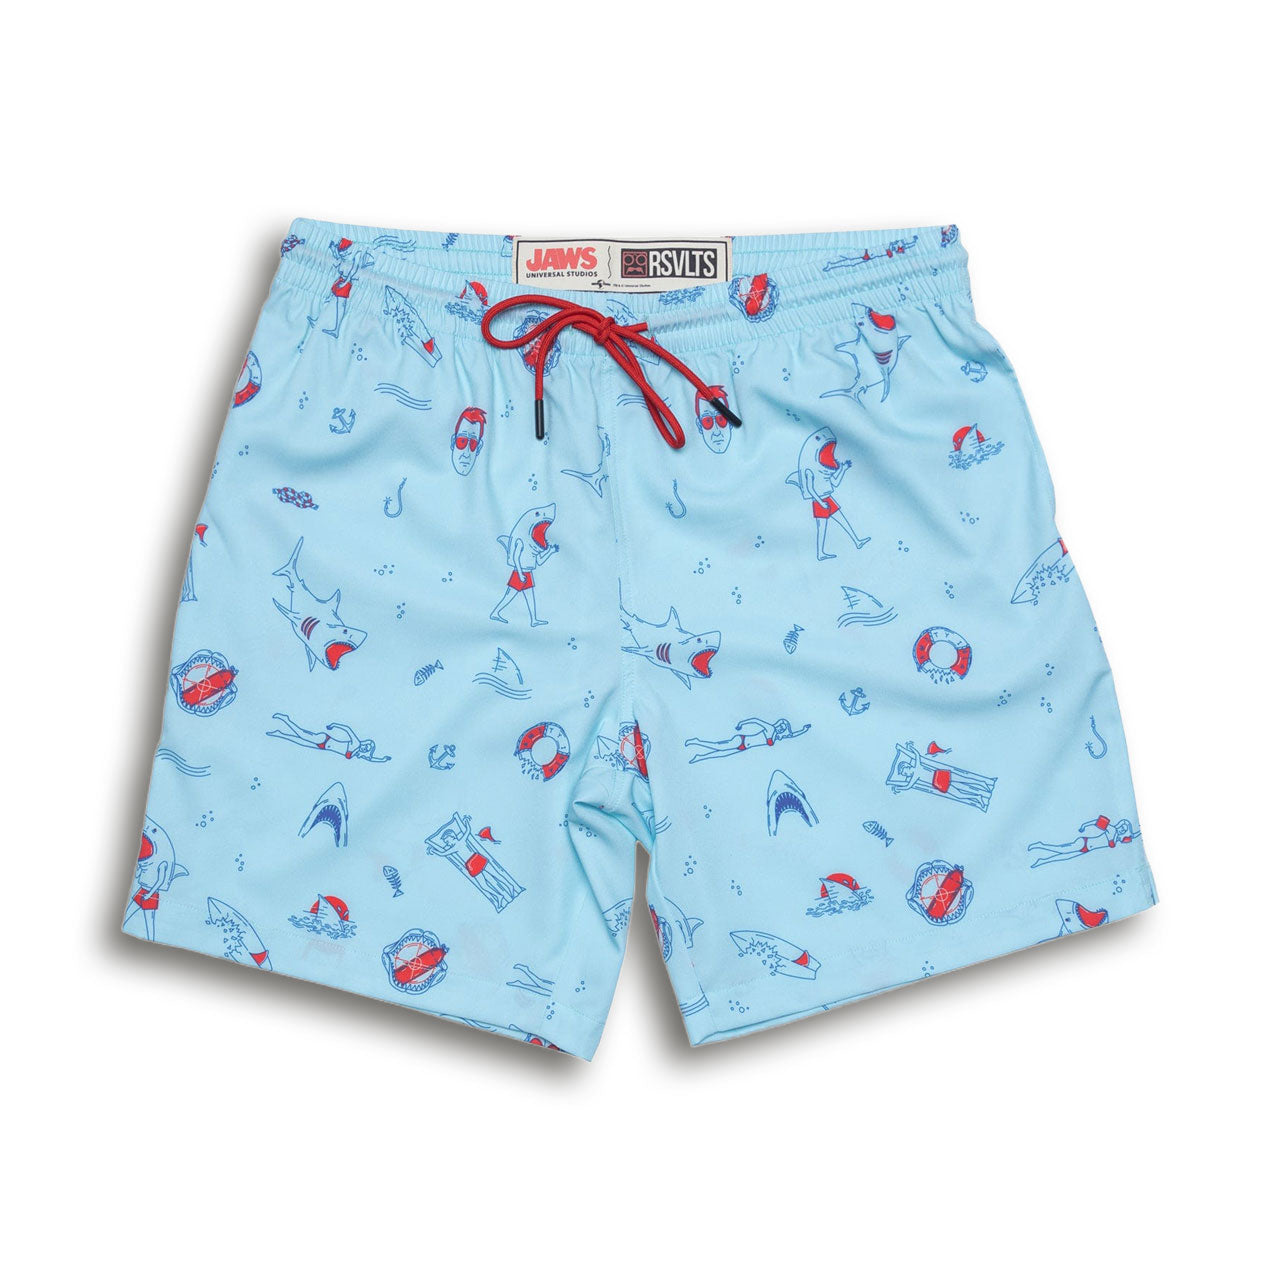 RSVLTS Jaws Amity Island Hybrid Shorts | Uncrate